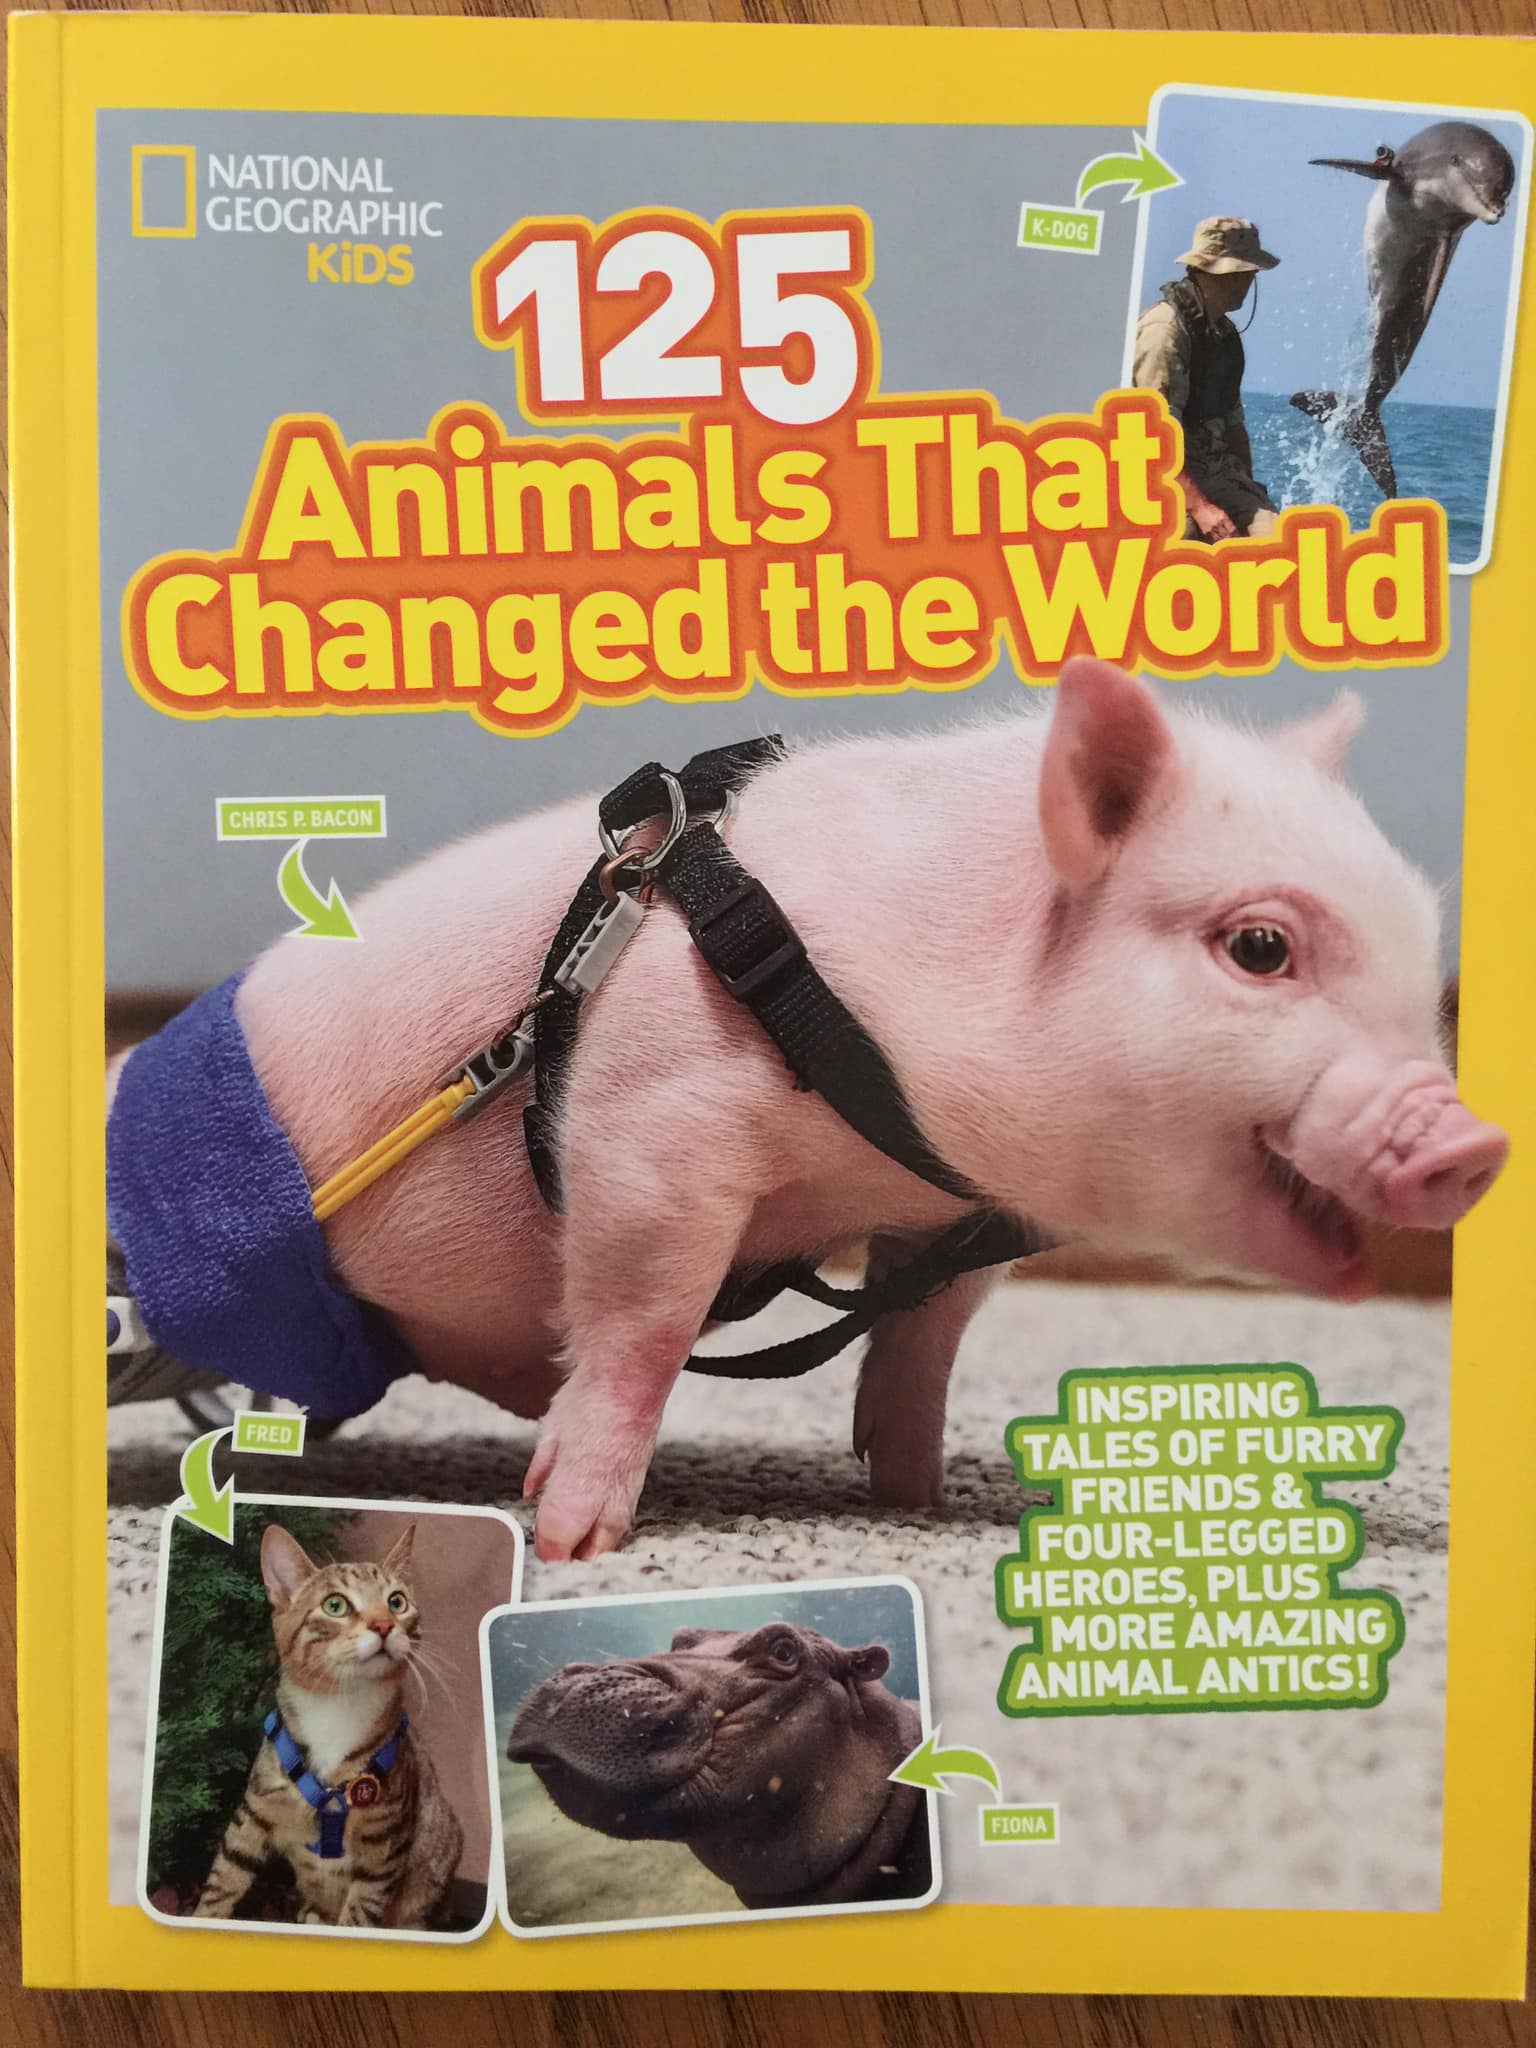 ANGEL BECOMES NATIONAL GEOGRAPHIC “125 Animals That Changed the World”